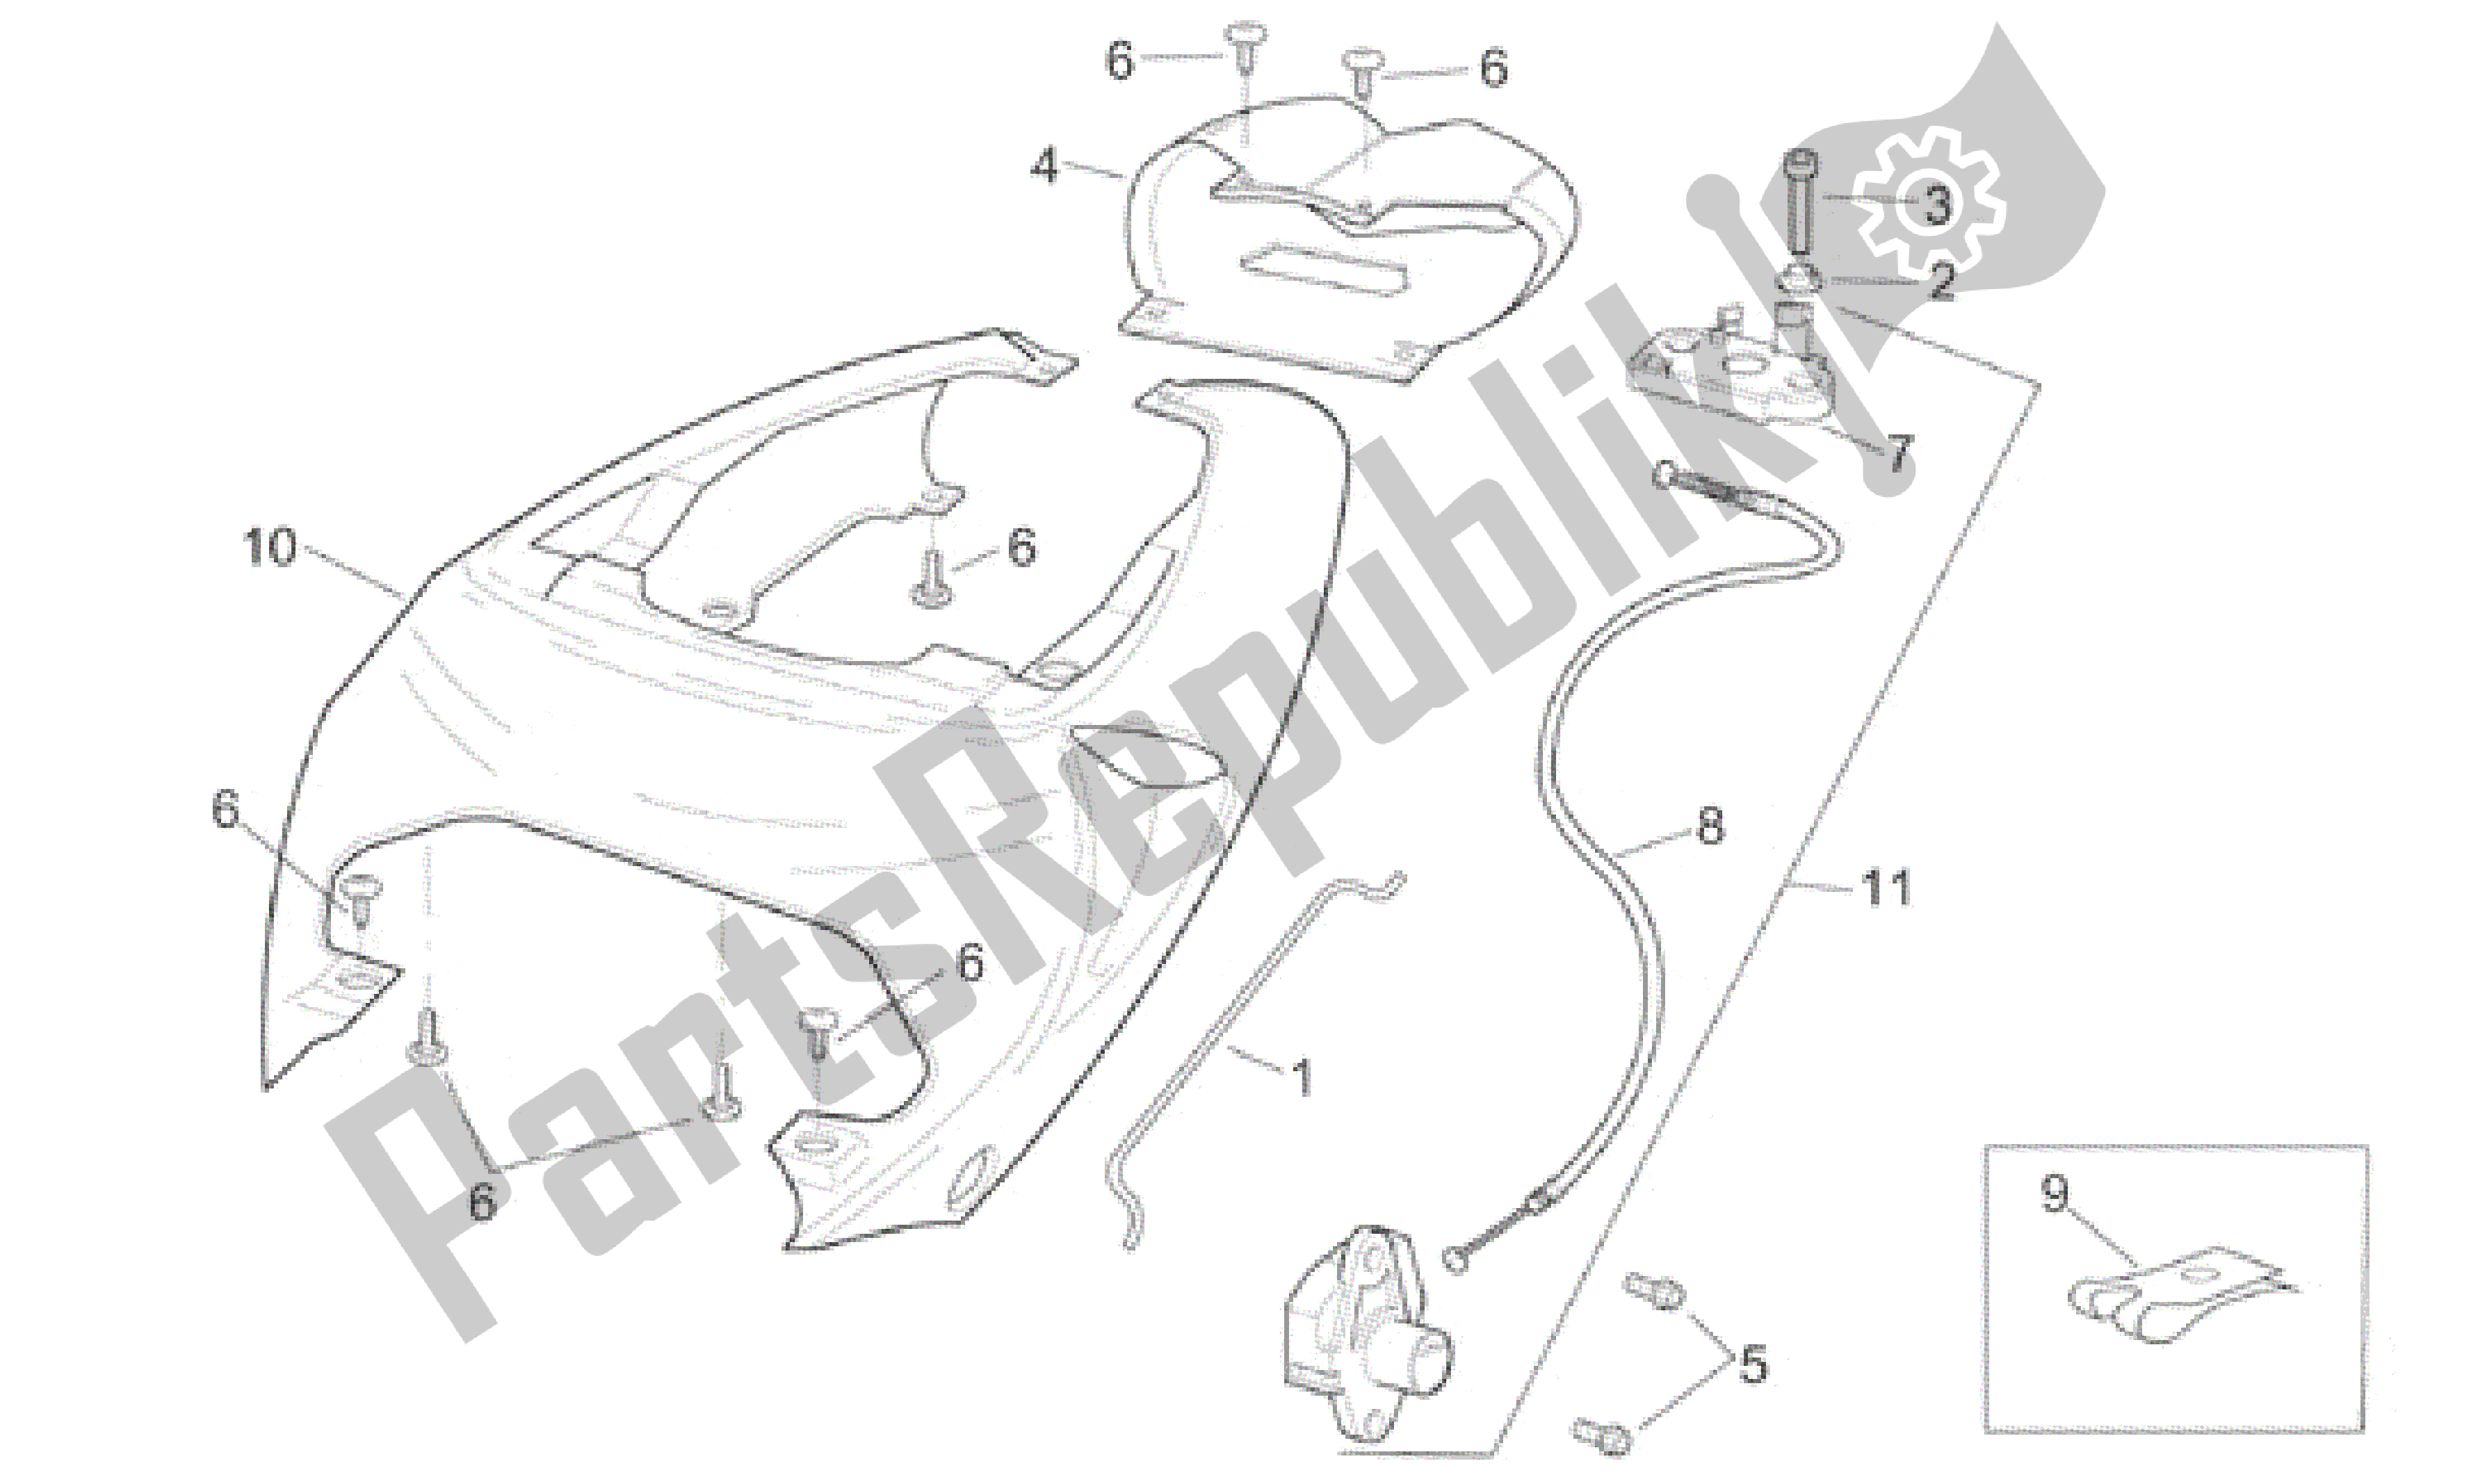 All parts for the Rear Body - Rear Fairing of the Aprilia RSV Mille 3901 1000 2001 - 2002